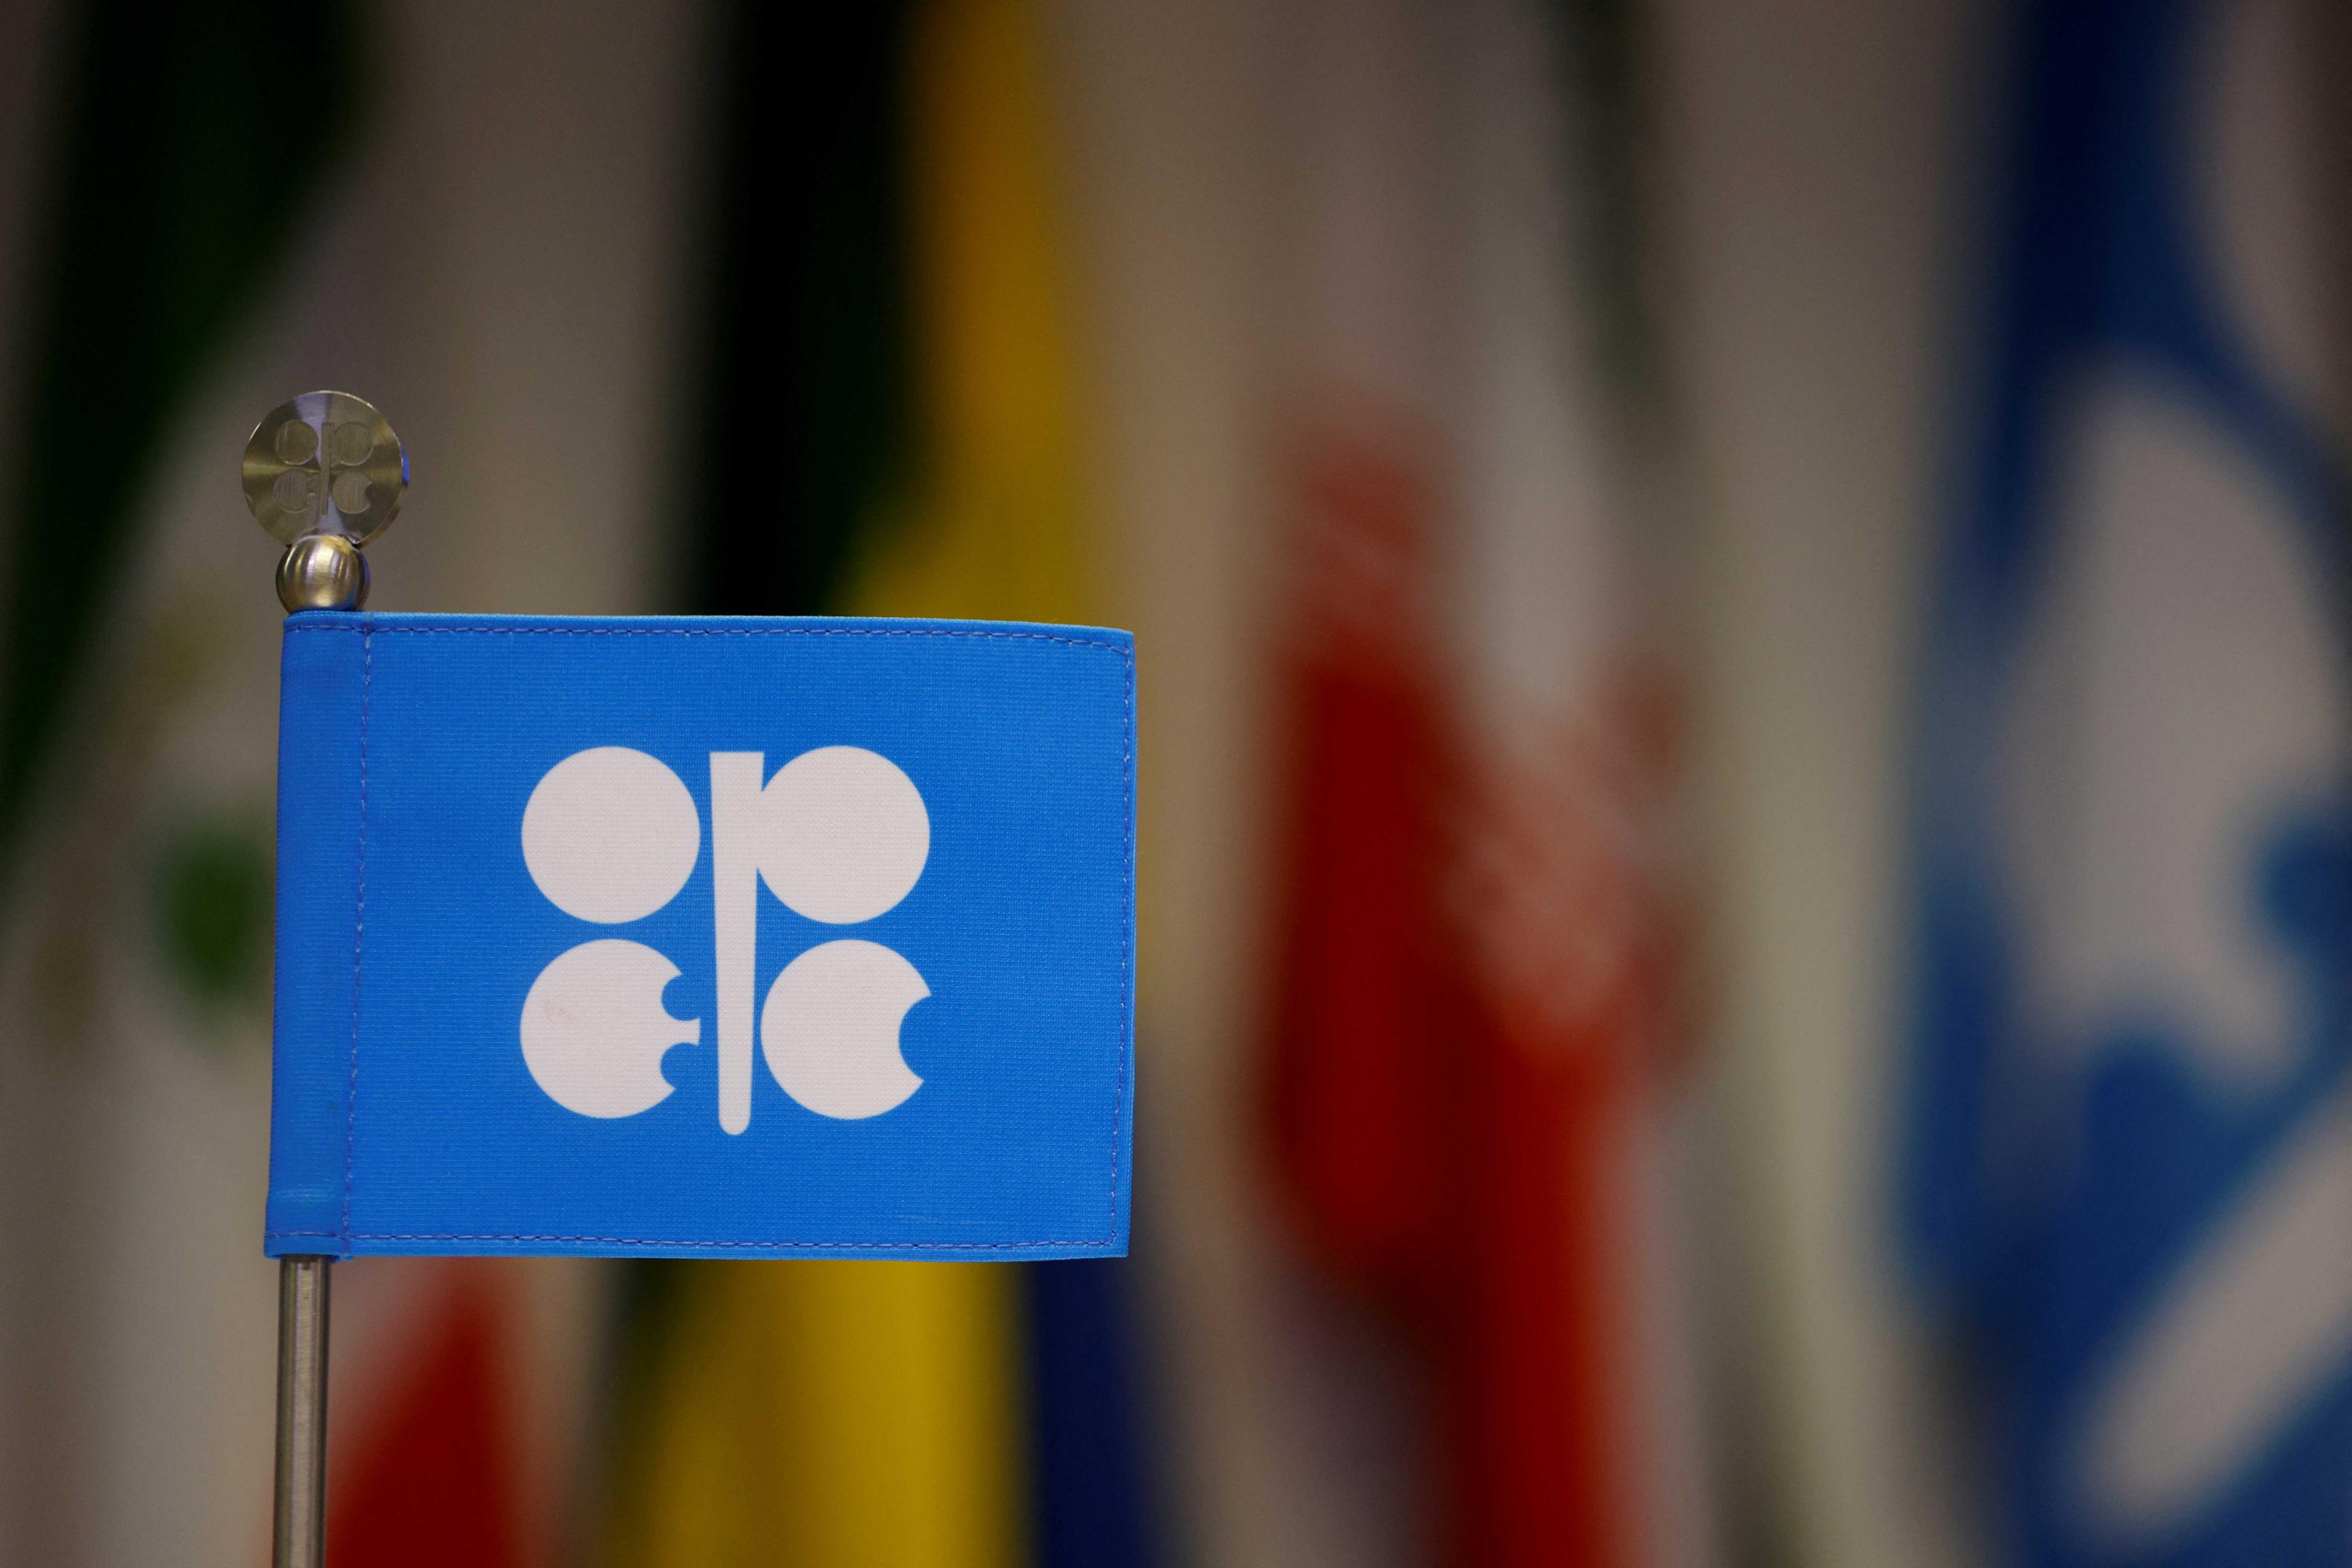 An Opec flag is seen on the day of Opec+ meeting in Vienna in Vienna, Austria Oct 5. Photo: Reuters